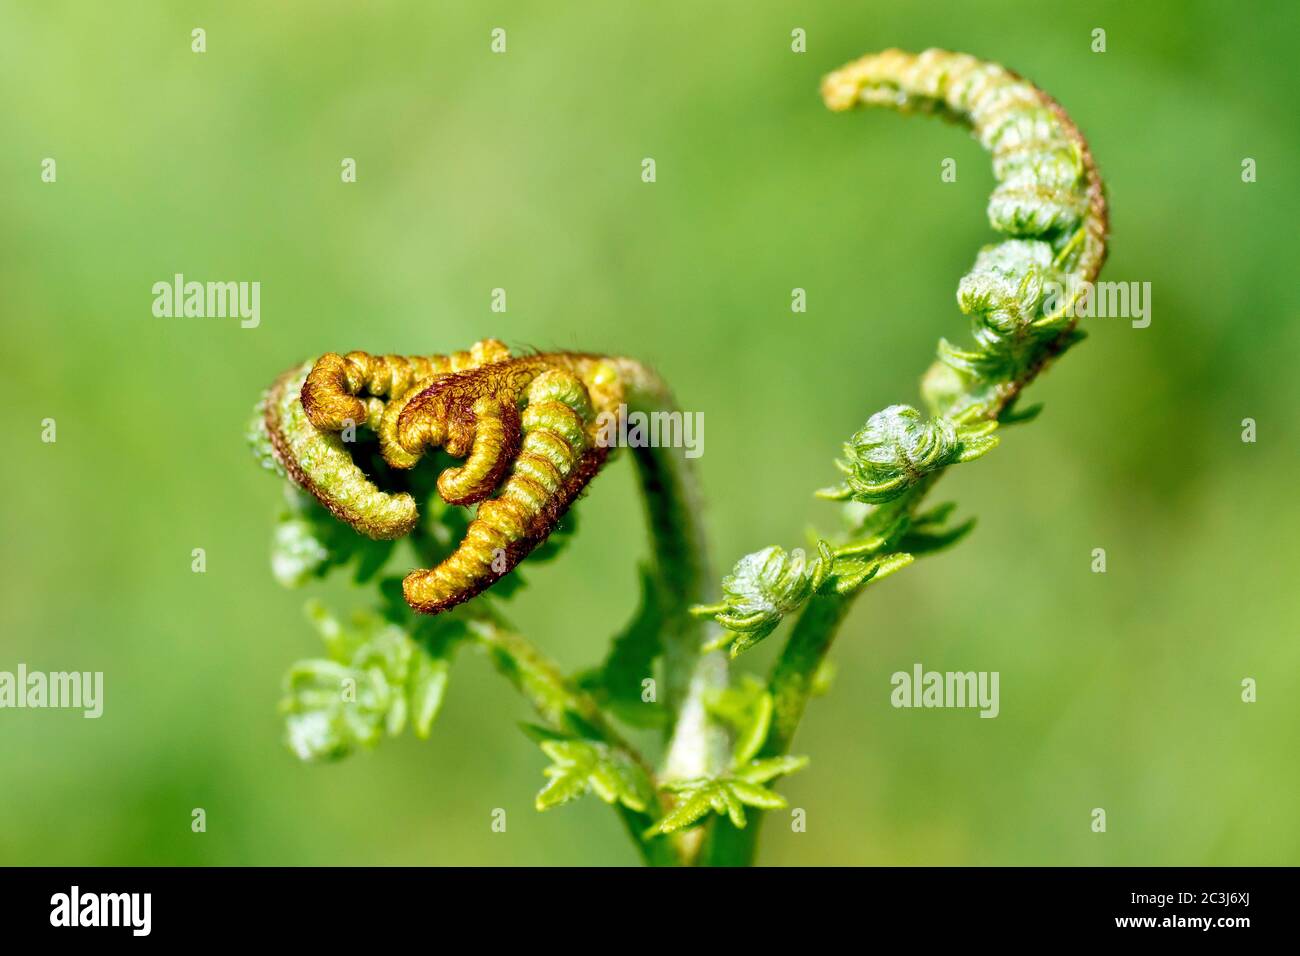 Bracken (pteridium aquilinum), close up of the head of a plant as the fronds begin to unfurl in the spring, isolated against a plain background. Stock Photo